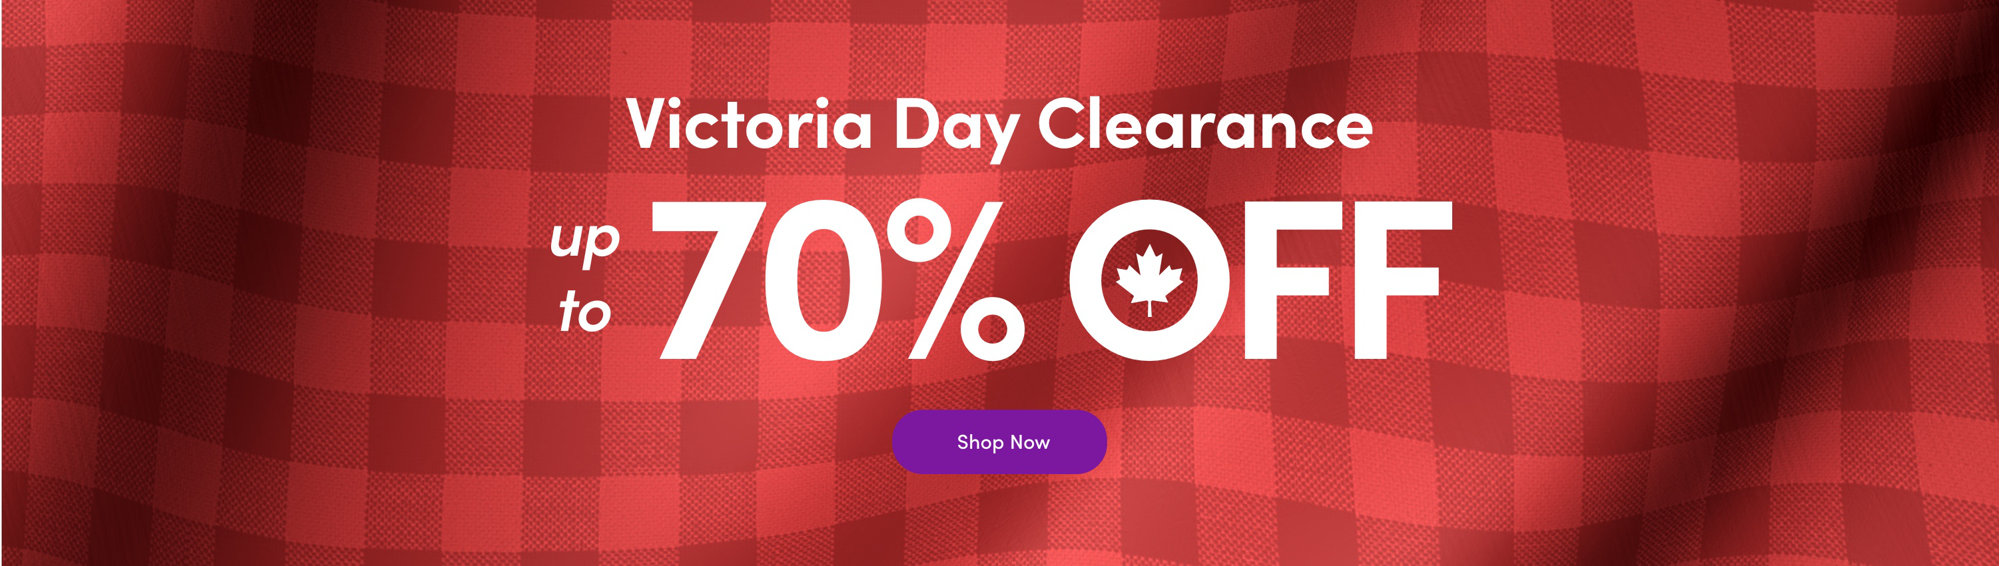 Victoria Day Clearance up to 70% OFF Shop Now